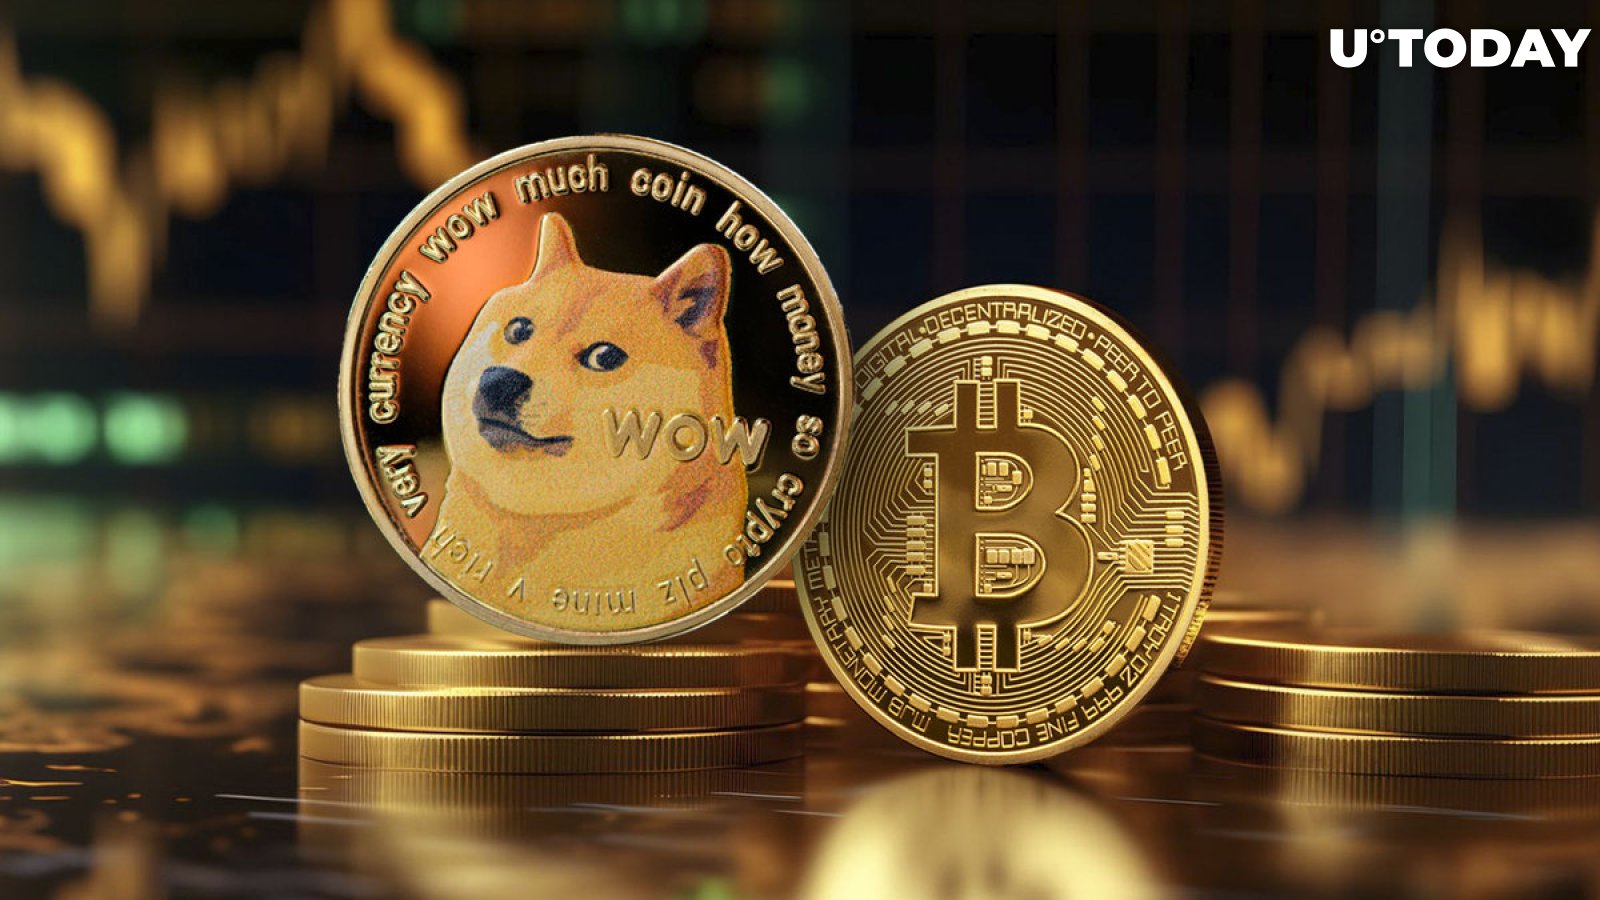 Dogecoin (DOGE) Founder Expects Bitcoin (BTC) to Pull Back After New ATH